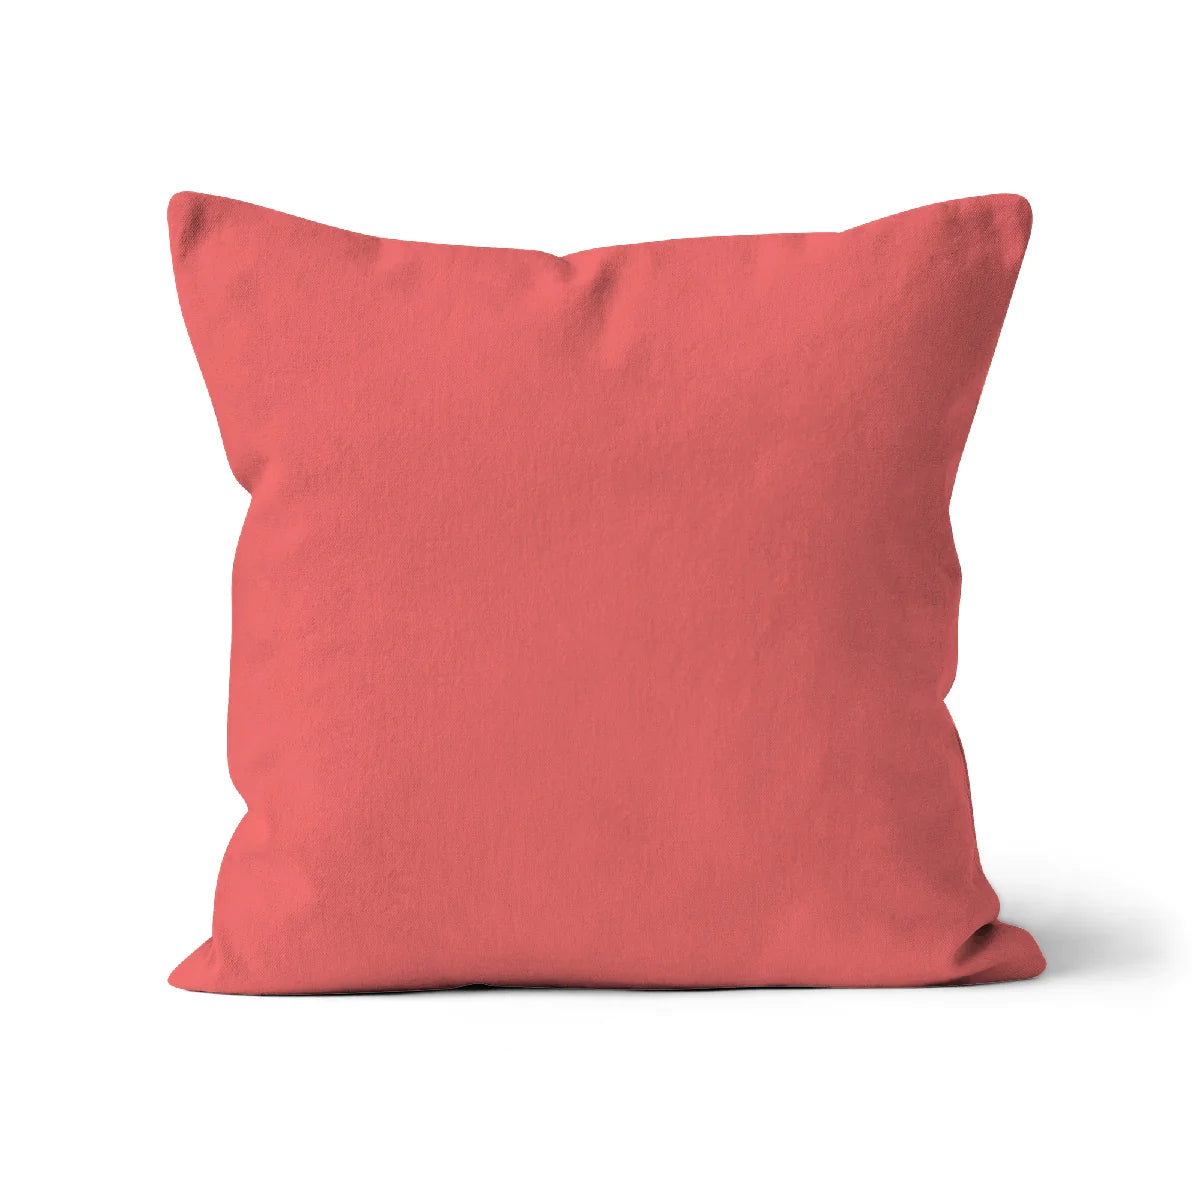 Coral pink cotton cushion cover. Warm-pink square scatter cushion cover. Made with organic cotton in the UK. Our sustainable homeware Plain cushion covers are printed with Eco-friendly water-based inks. Removable and machine-washable cushion covers. 